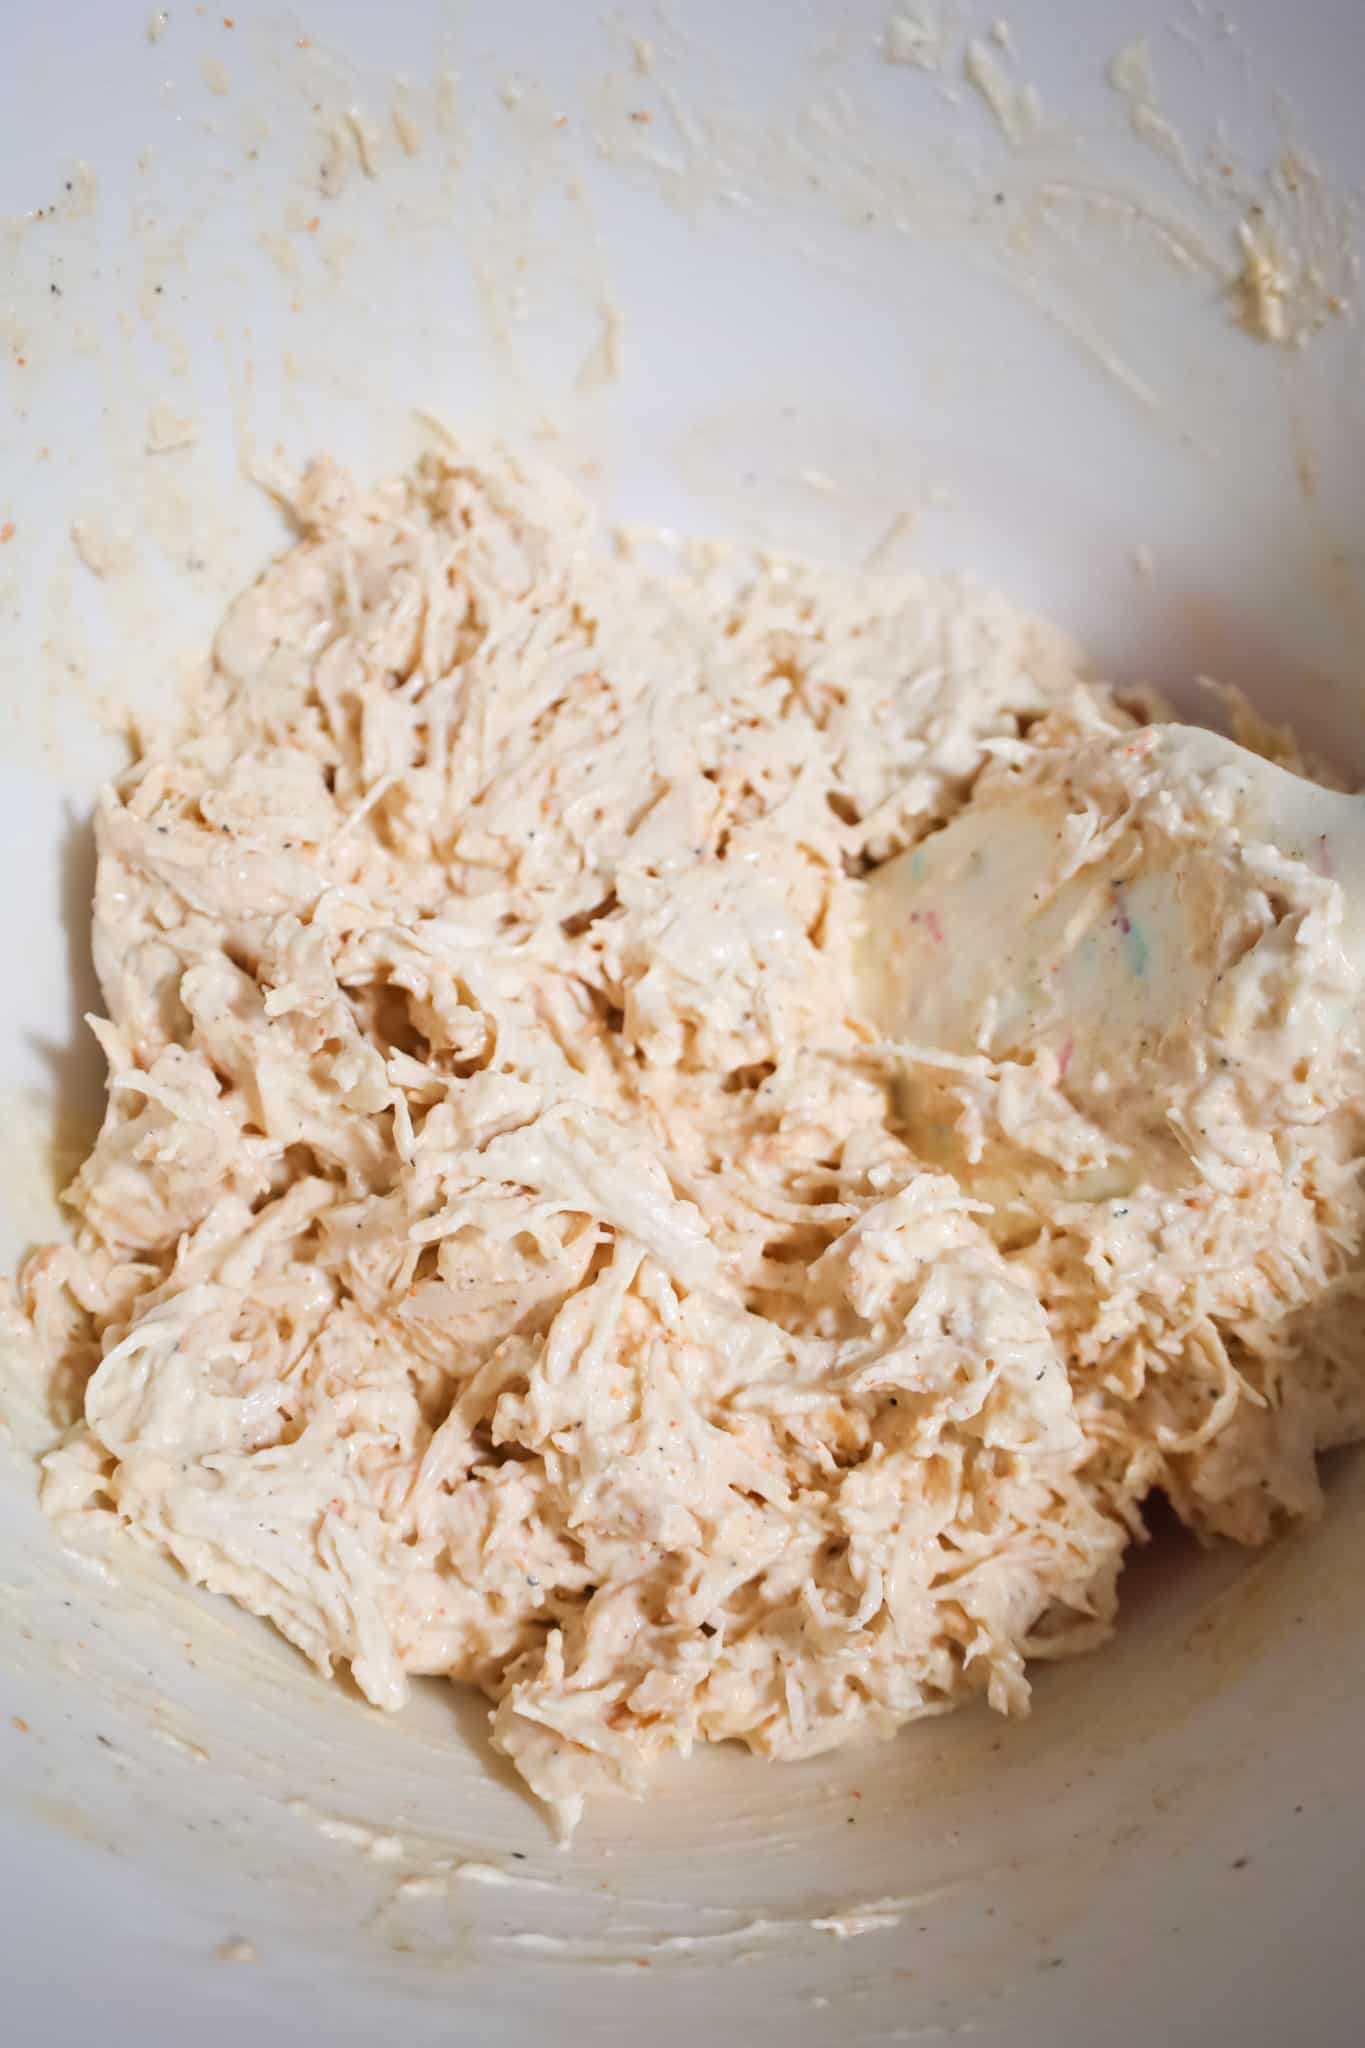 mayo and shredded mixture in a mixing bowl